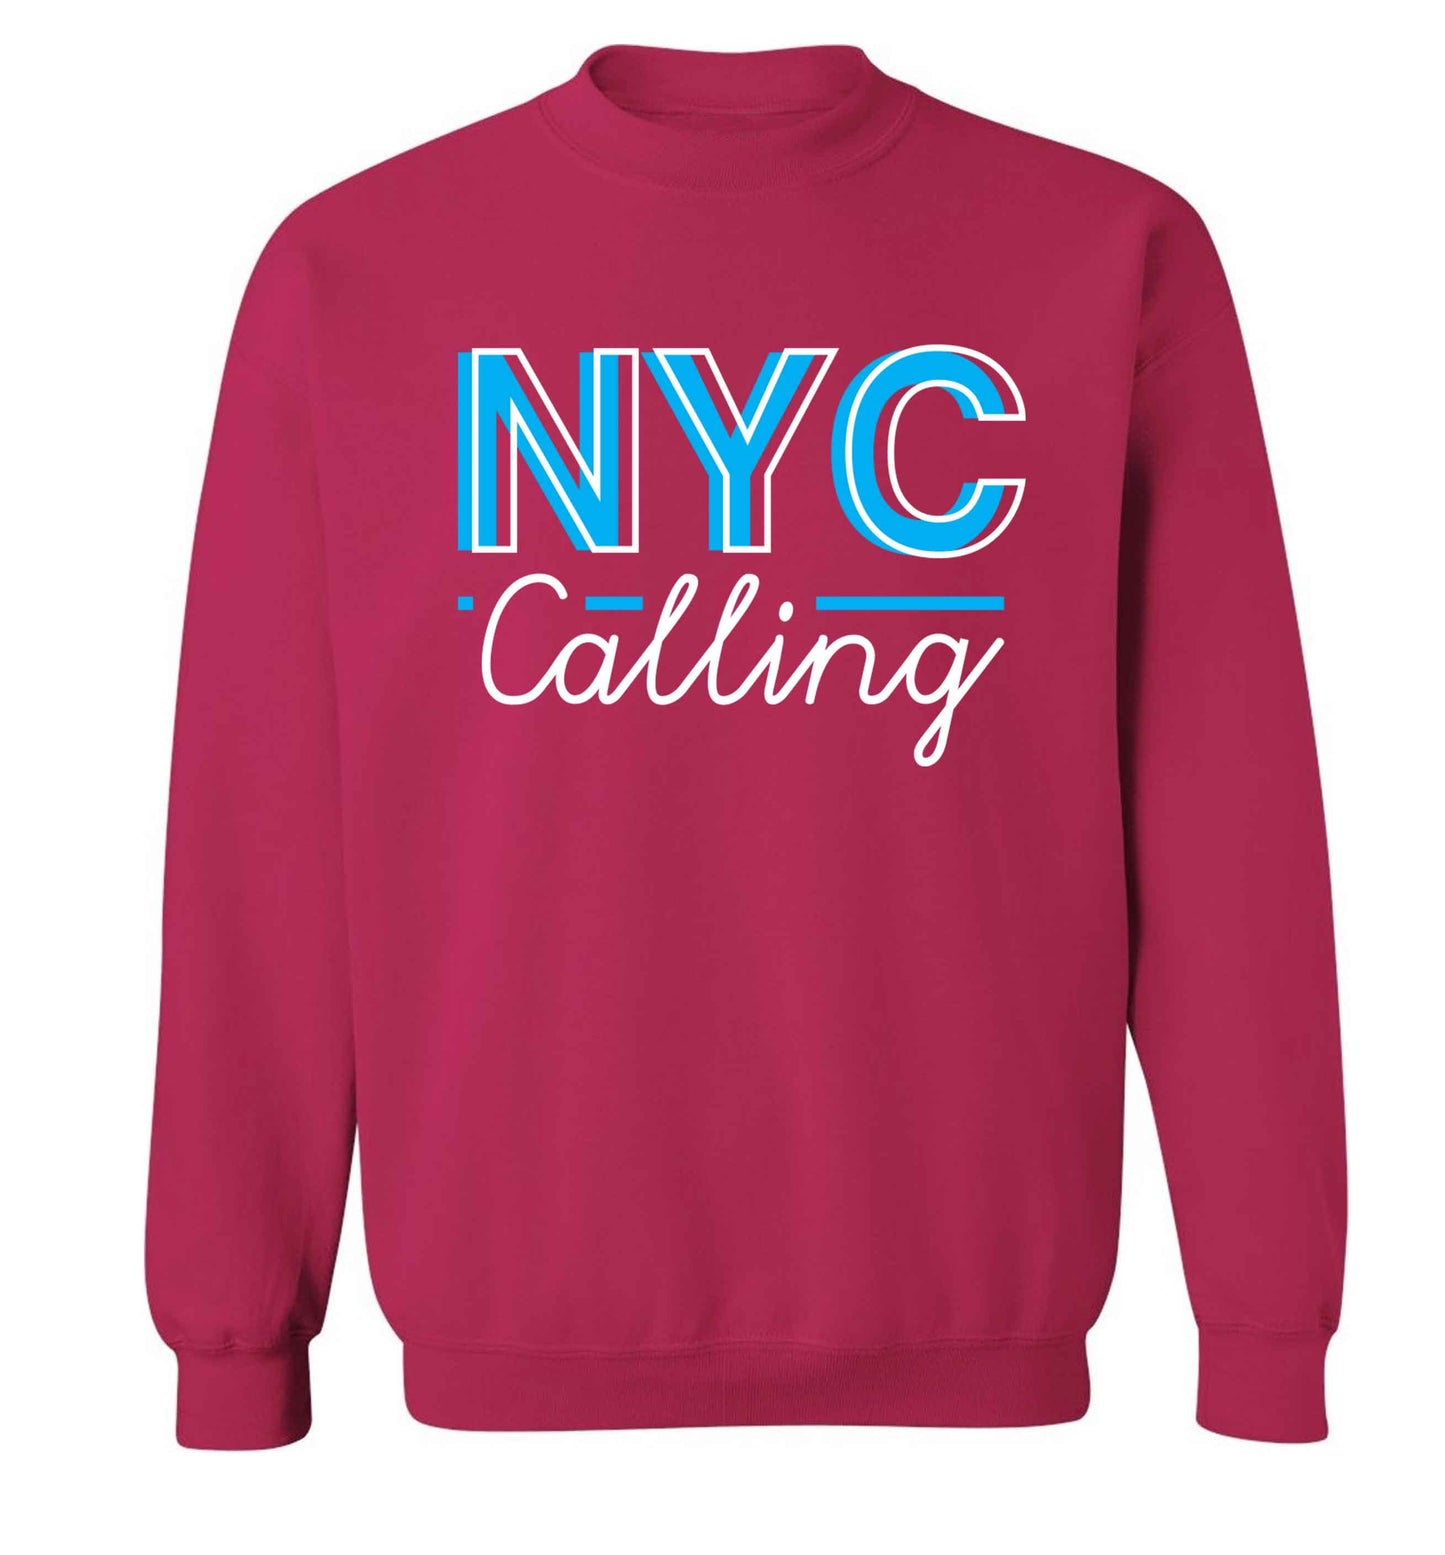 NYC calling Adult's unisex pink Sweater 2XL